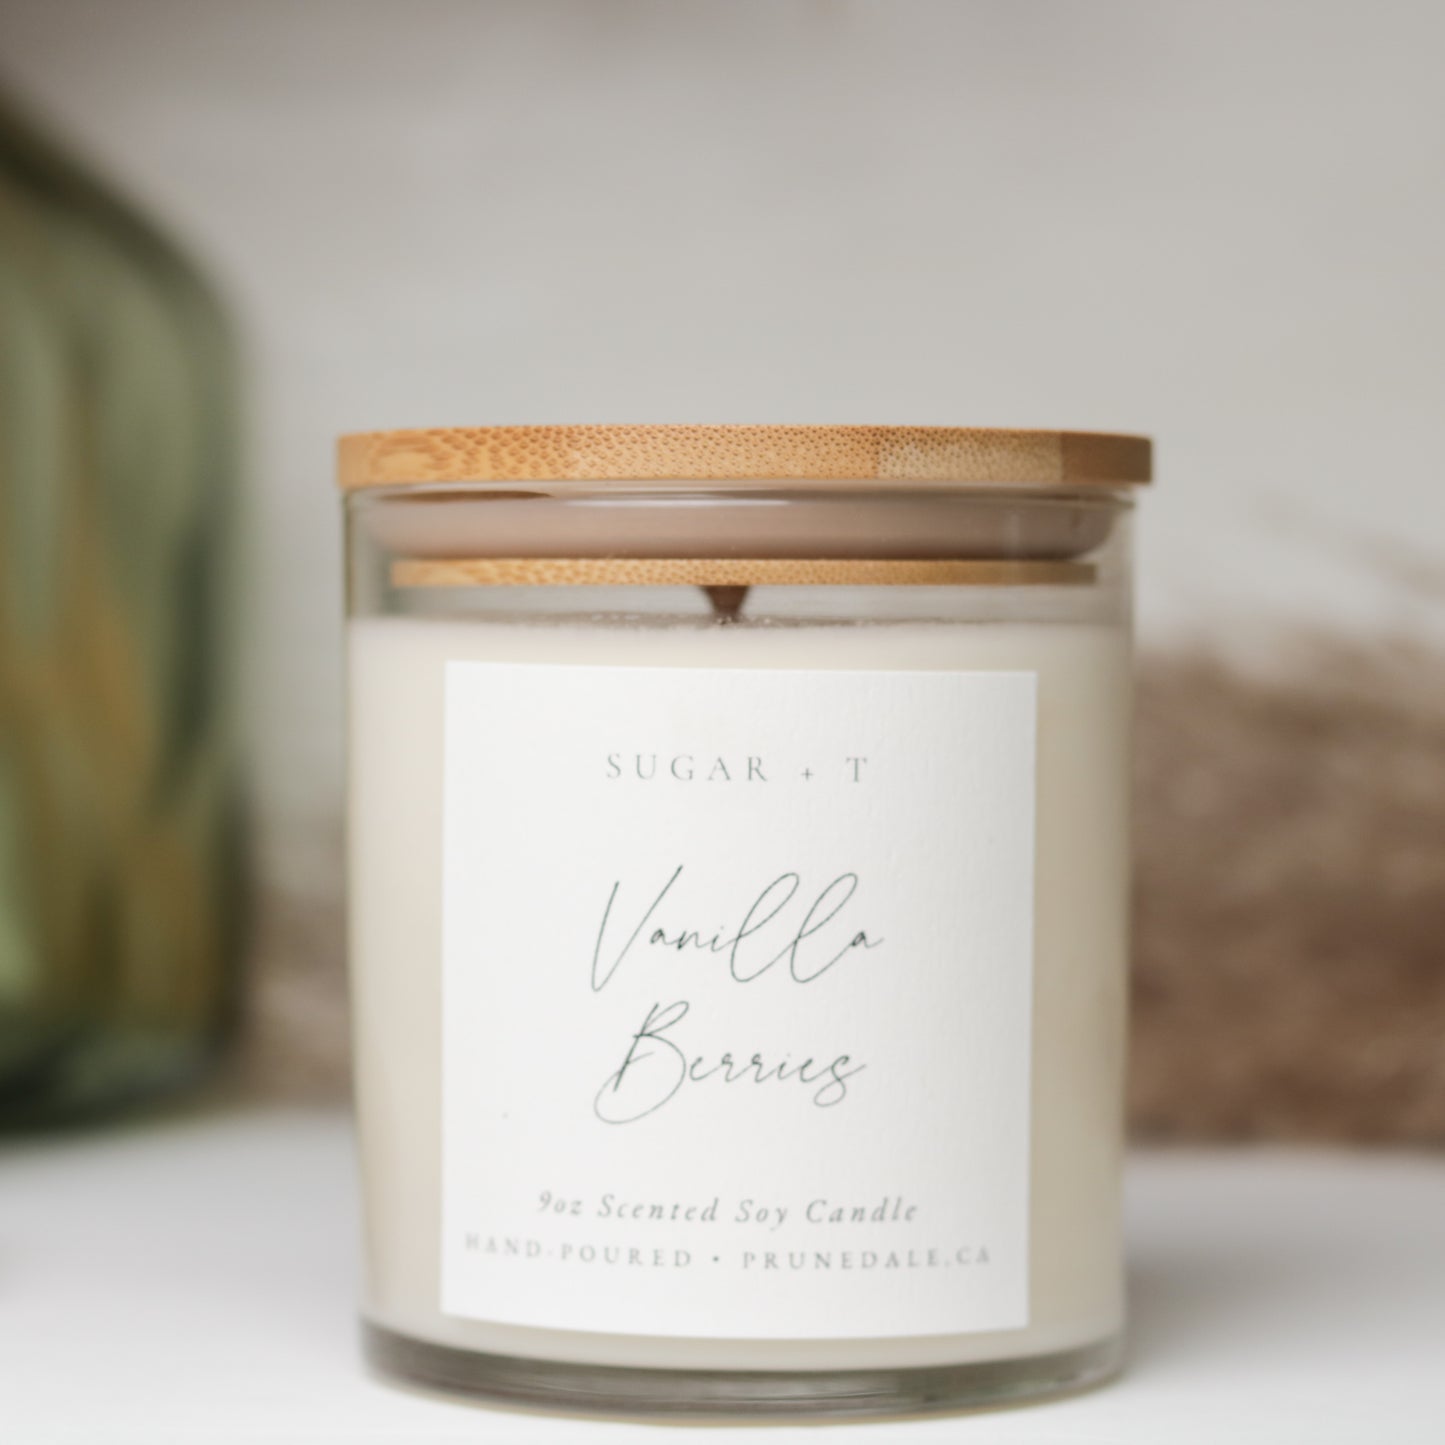 Vanilla Berries Scented Candle